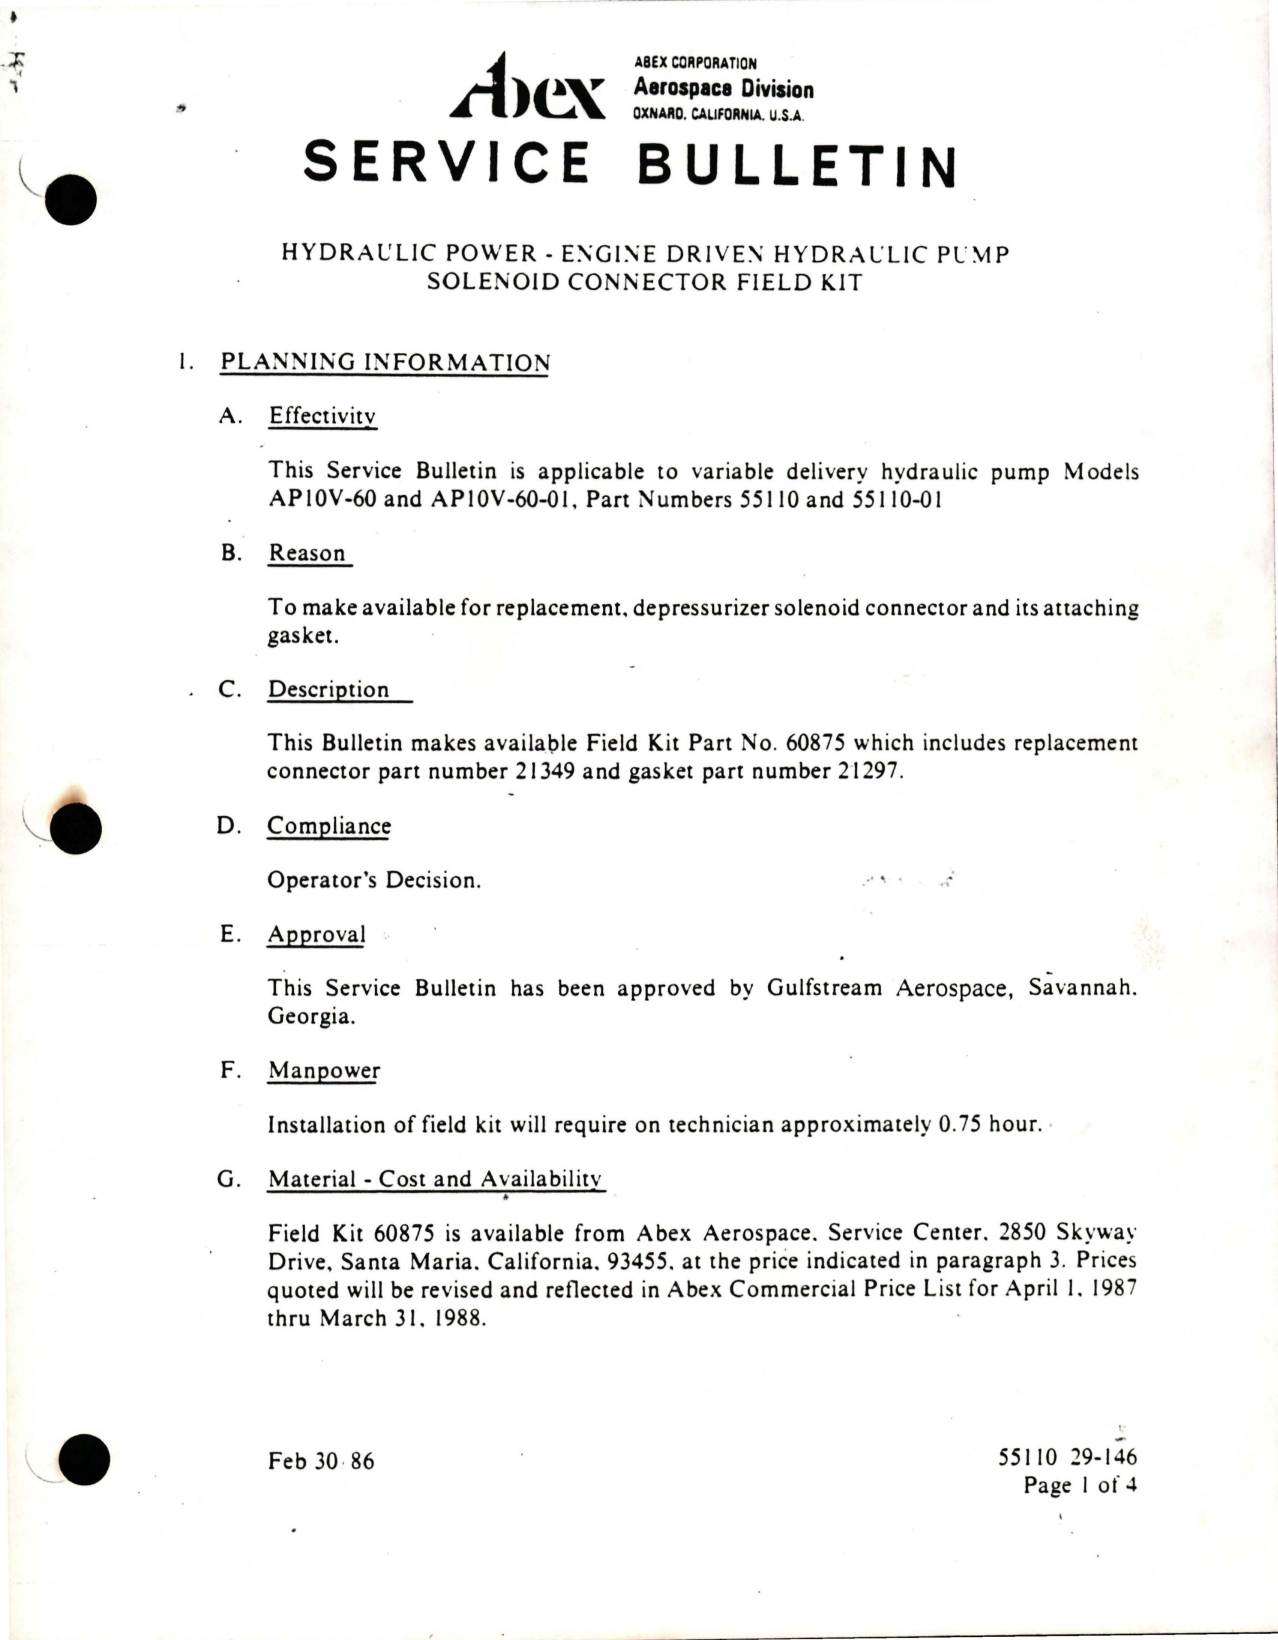 Sample page 1 from AirCorps Library document: Hydraulic Power - Engine Driven Hydraulic Pump Solenoid Connector Field Kit